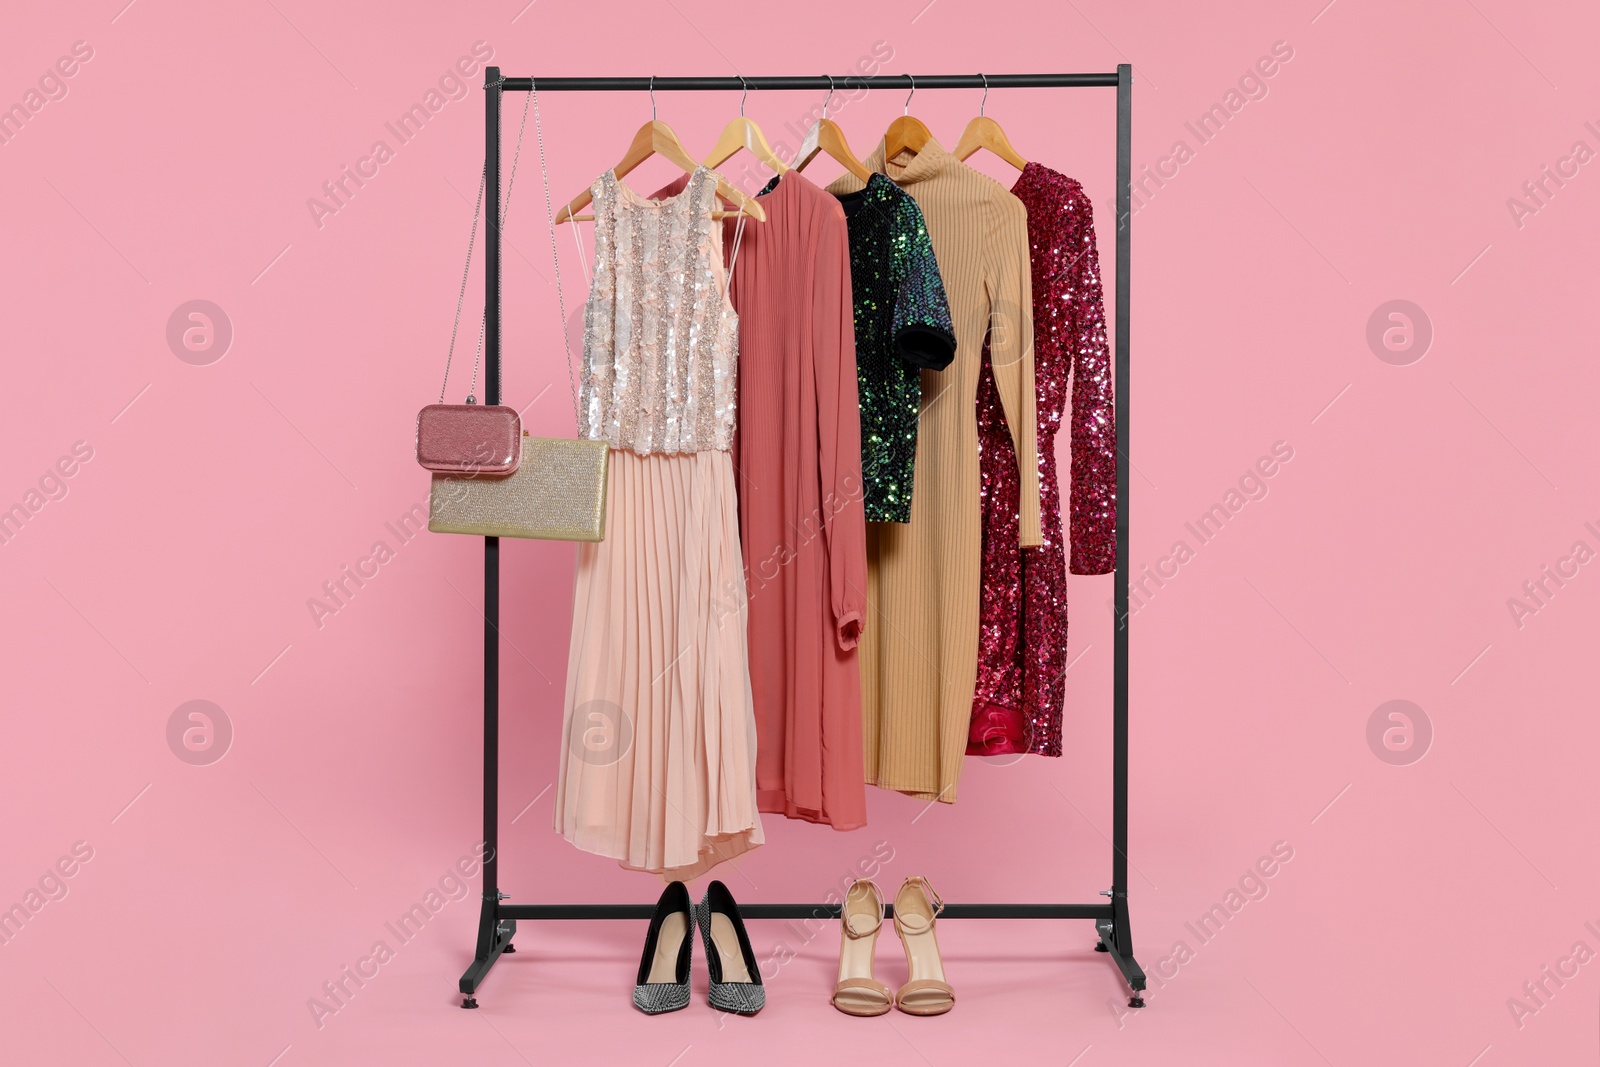 Photo of Rack with stylish women's clothes on wooden hangers, accessories and shoes against pink background